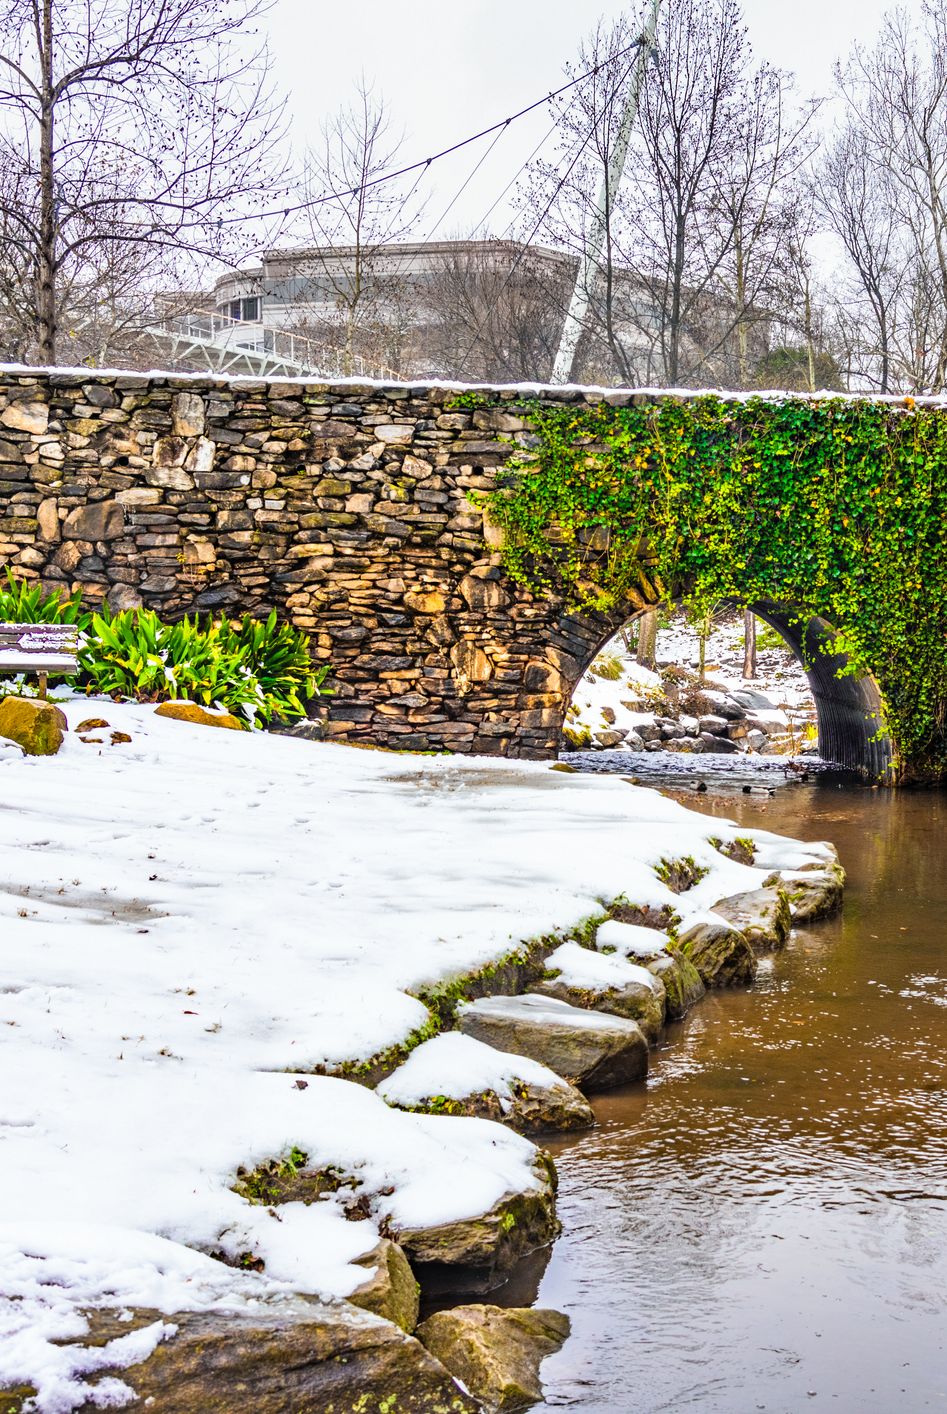 falls park and reedy river in greenville, sc, usa